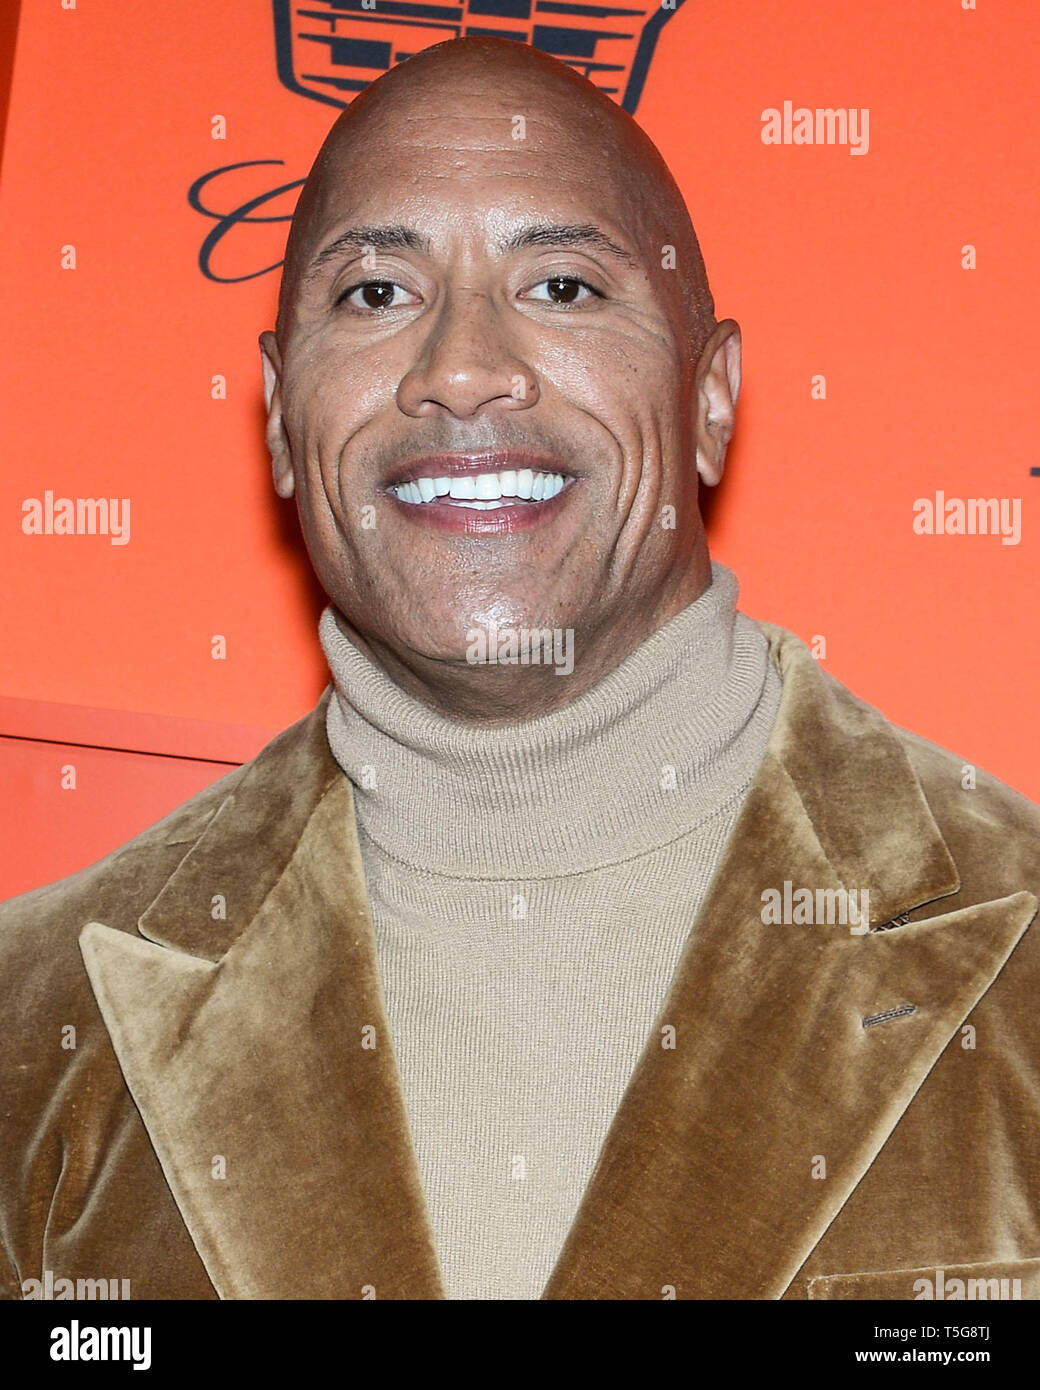 MANHATTAN, NEW YORK CITY, NEW YORK, USA - APRIL 23: Actor Dwayne Johnson  wearing Ralph Lauren arrives at the 2019 Time 100 Gala held at the  Frederick P. Rose Hall at Jazz